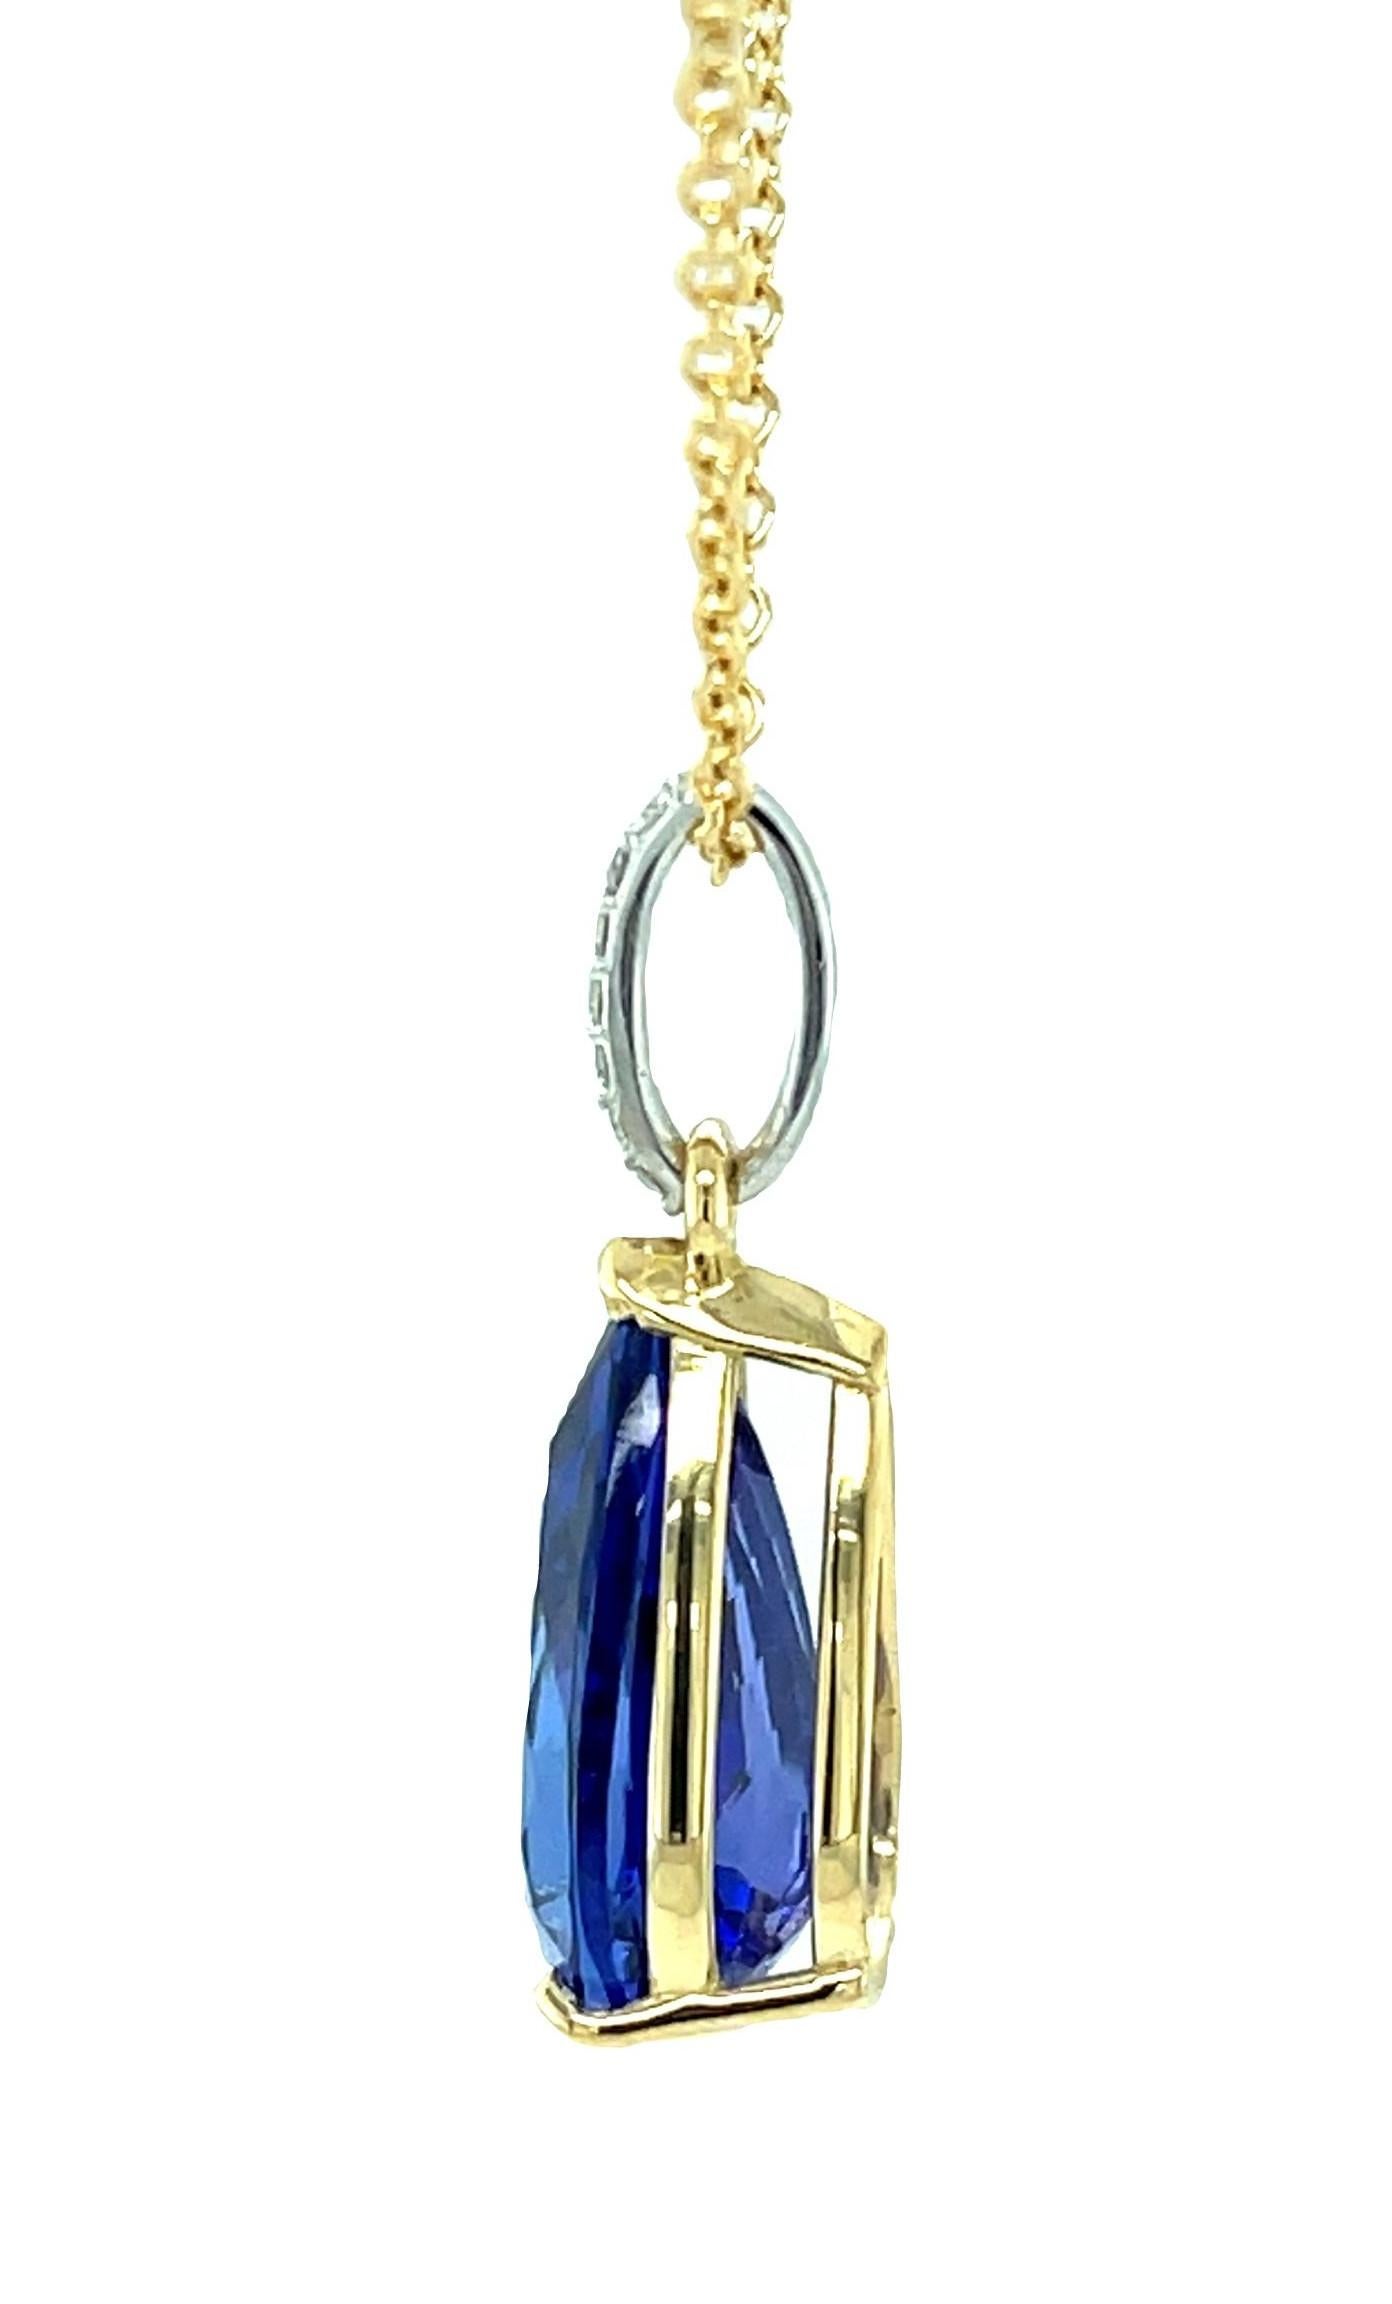 Women's or Men's 8.90 Carat Tanzanite & Diamond Pendant Necklace in White and Yellow Gold For Sale